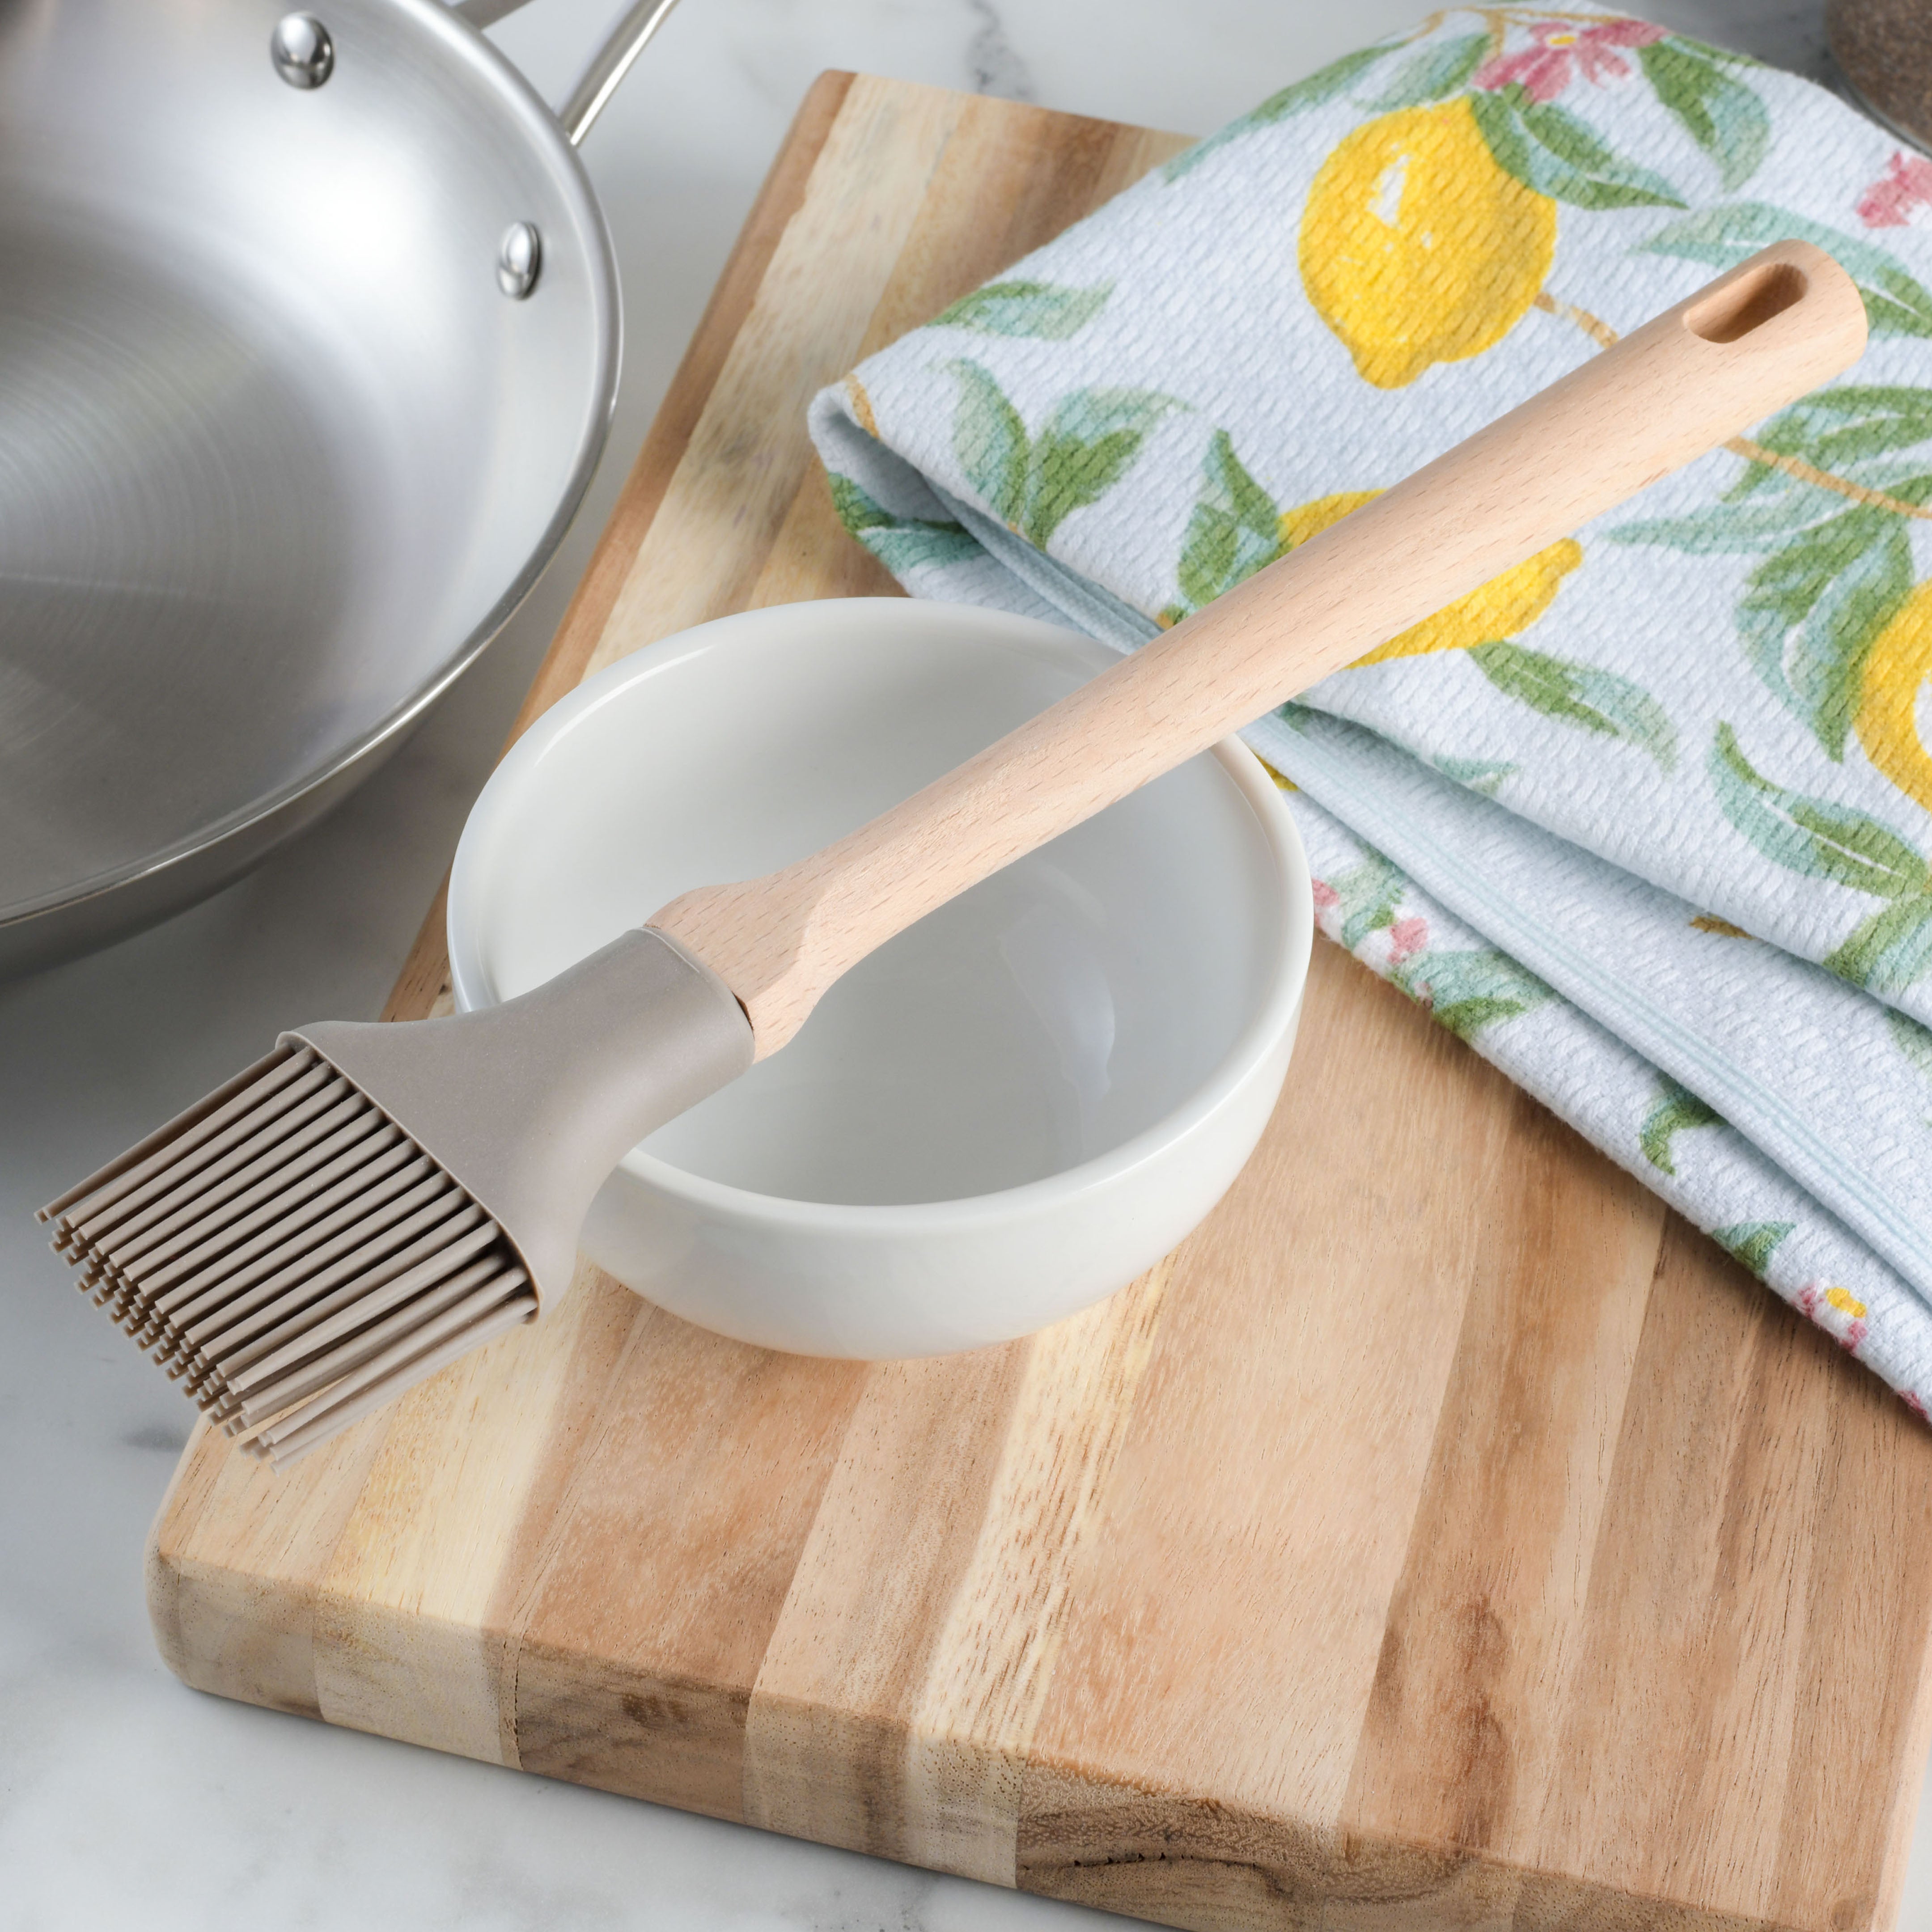 Baking Accessories, Pastry Tools & Gadgets, Bakeware